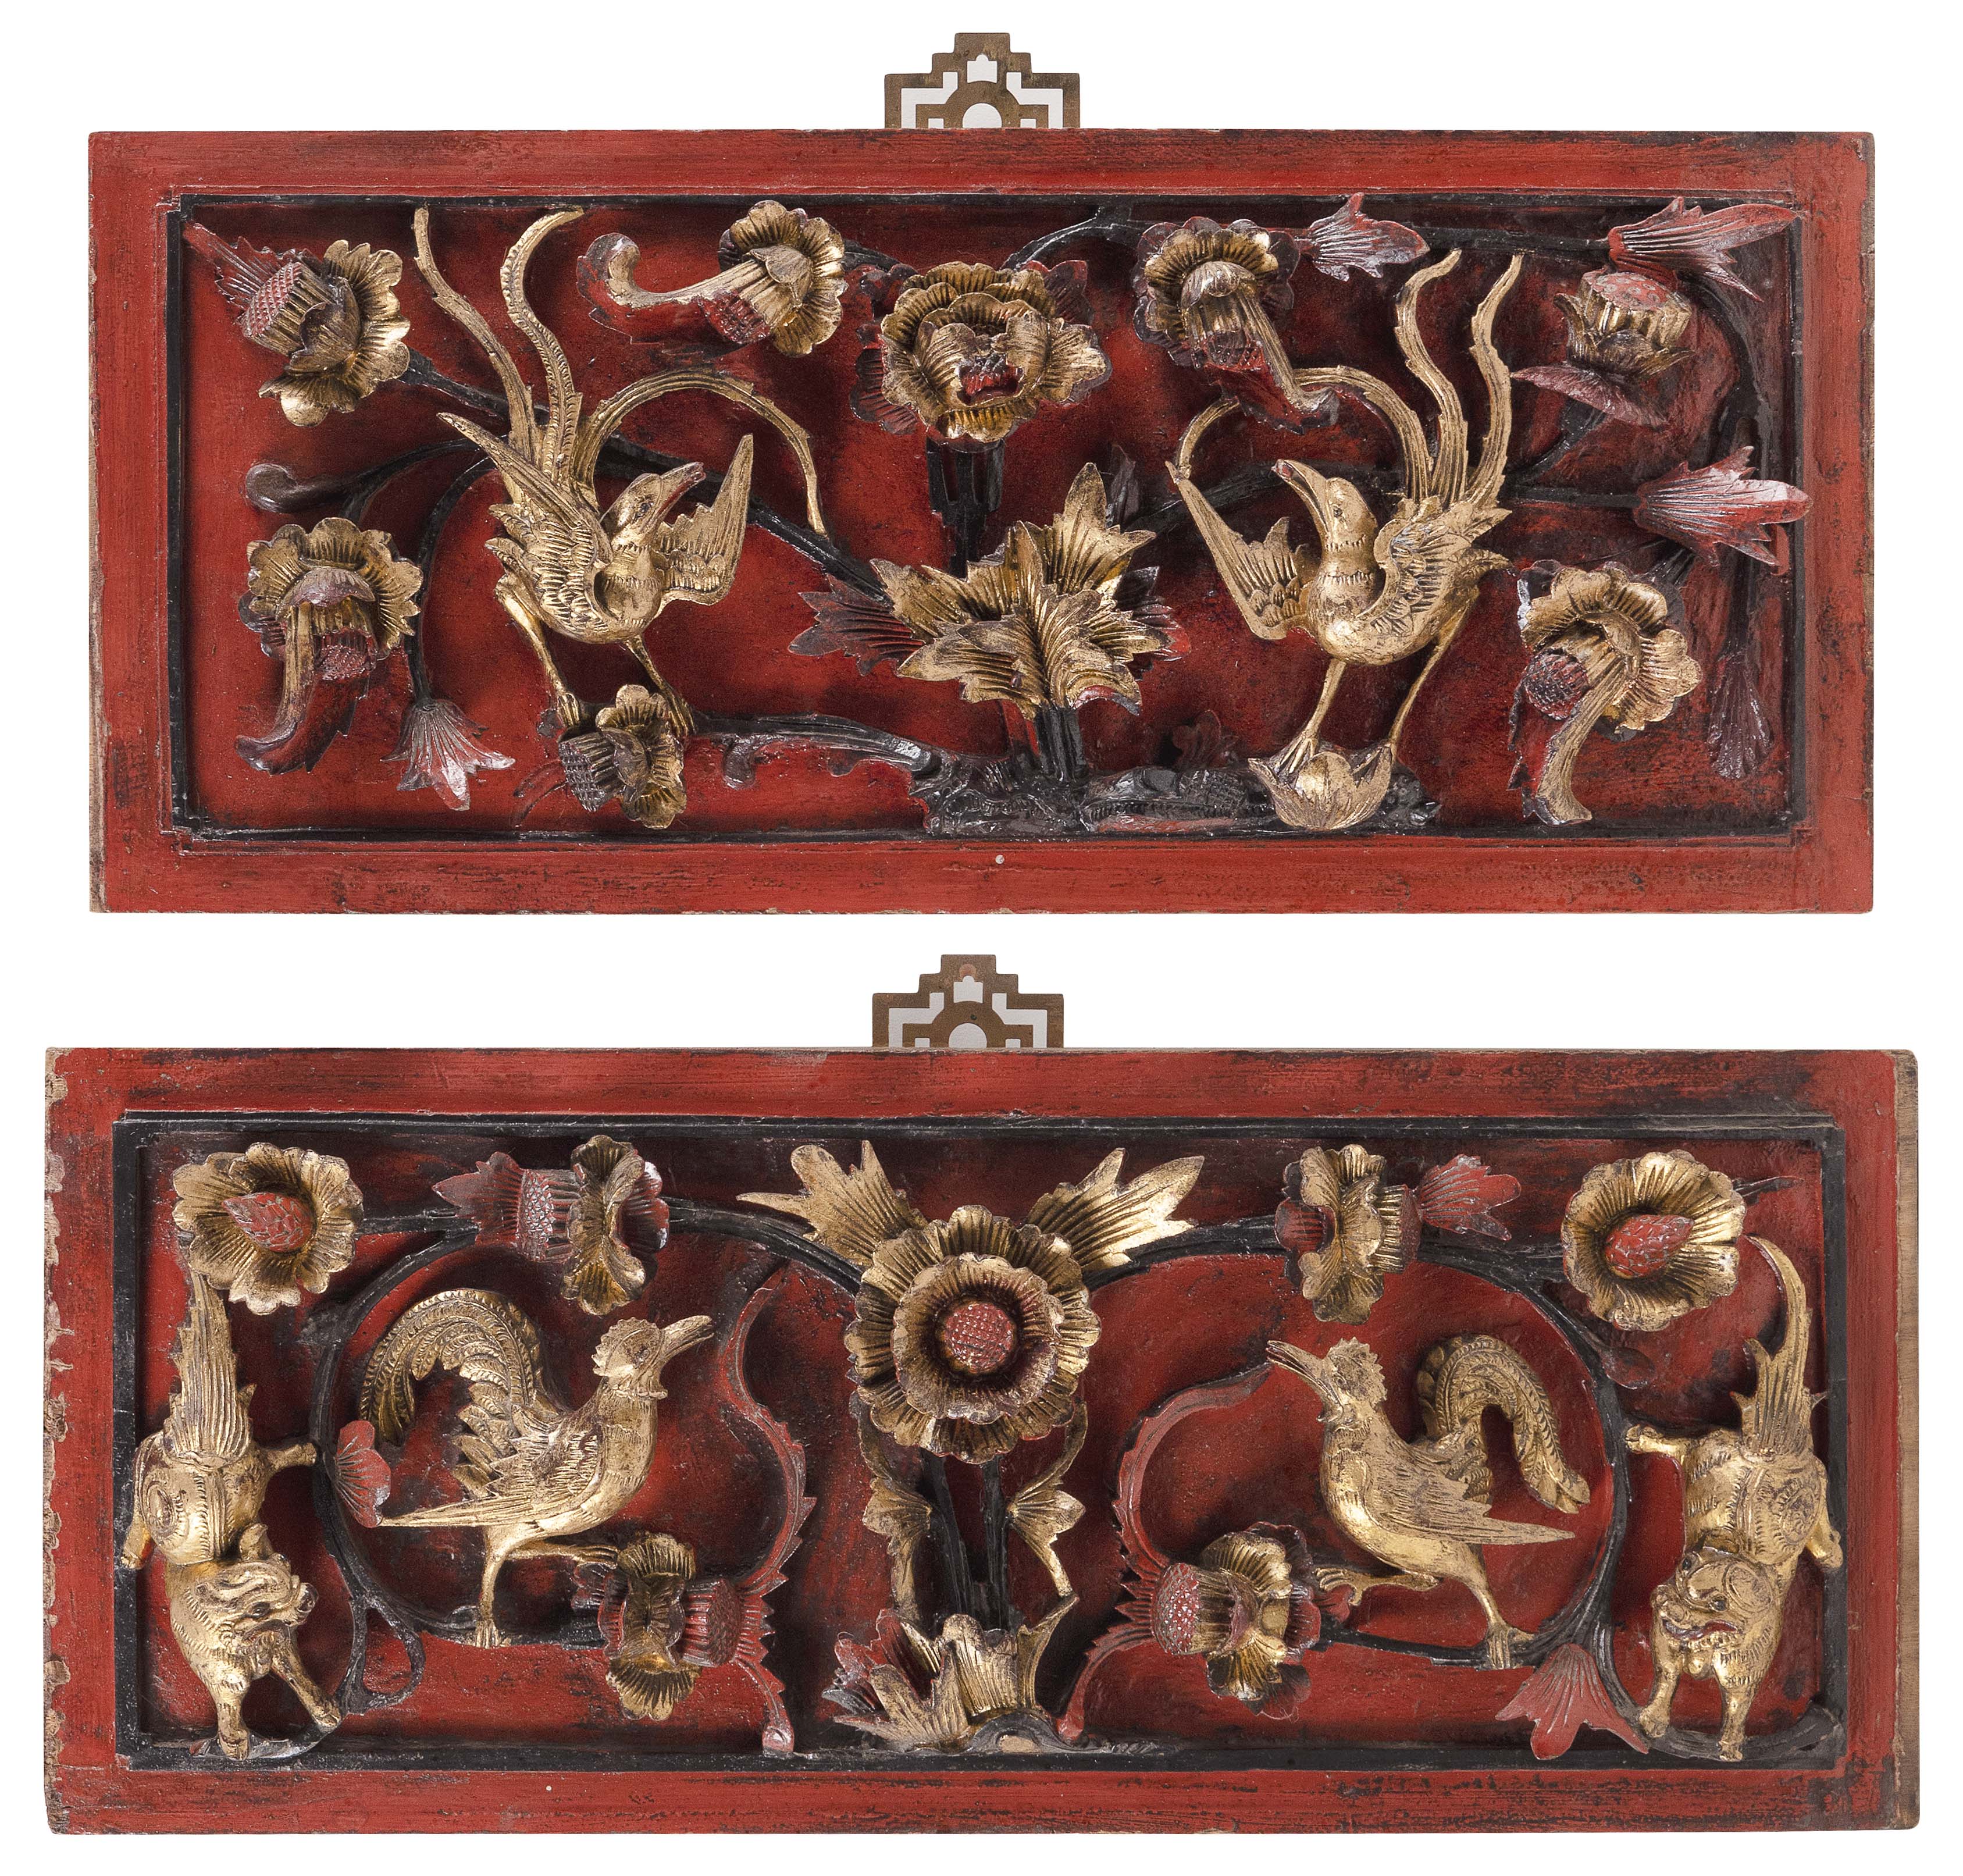 Image 1 for NEAR-PAIR OF CHINESE HIGH-RELIEF CARVED GILTWOOD PANELS Early 19th Century Heights approx. 7